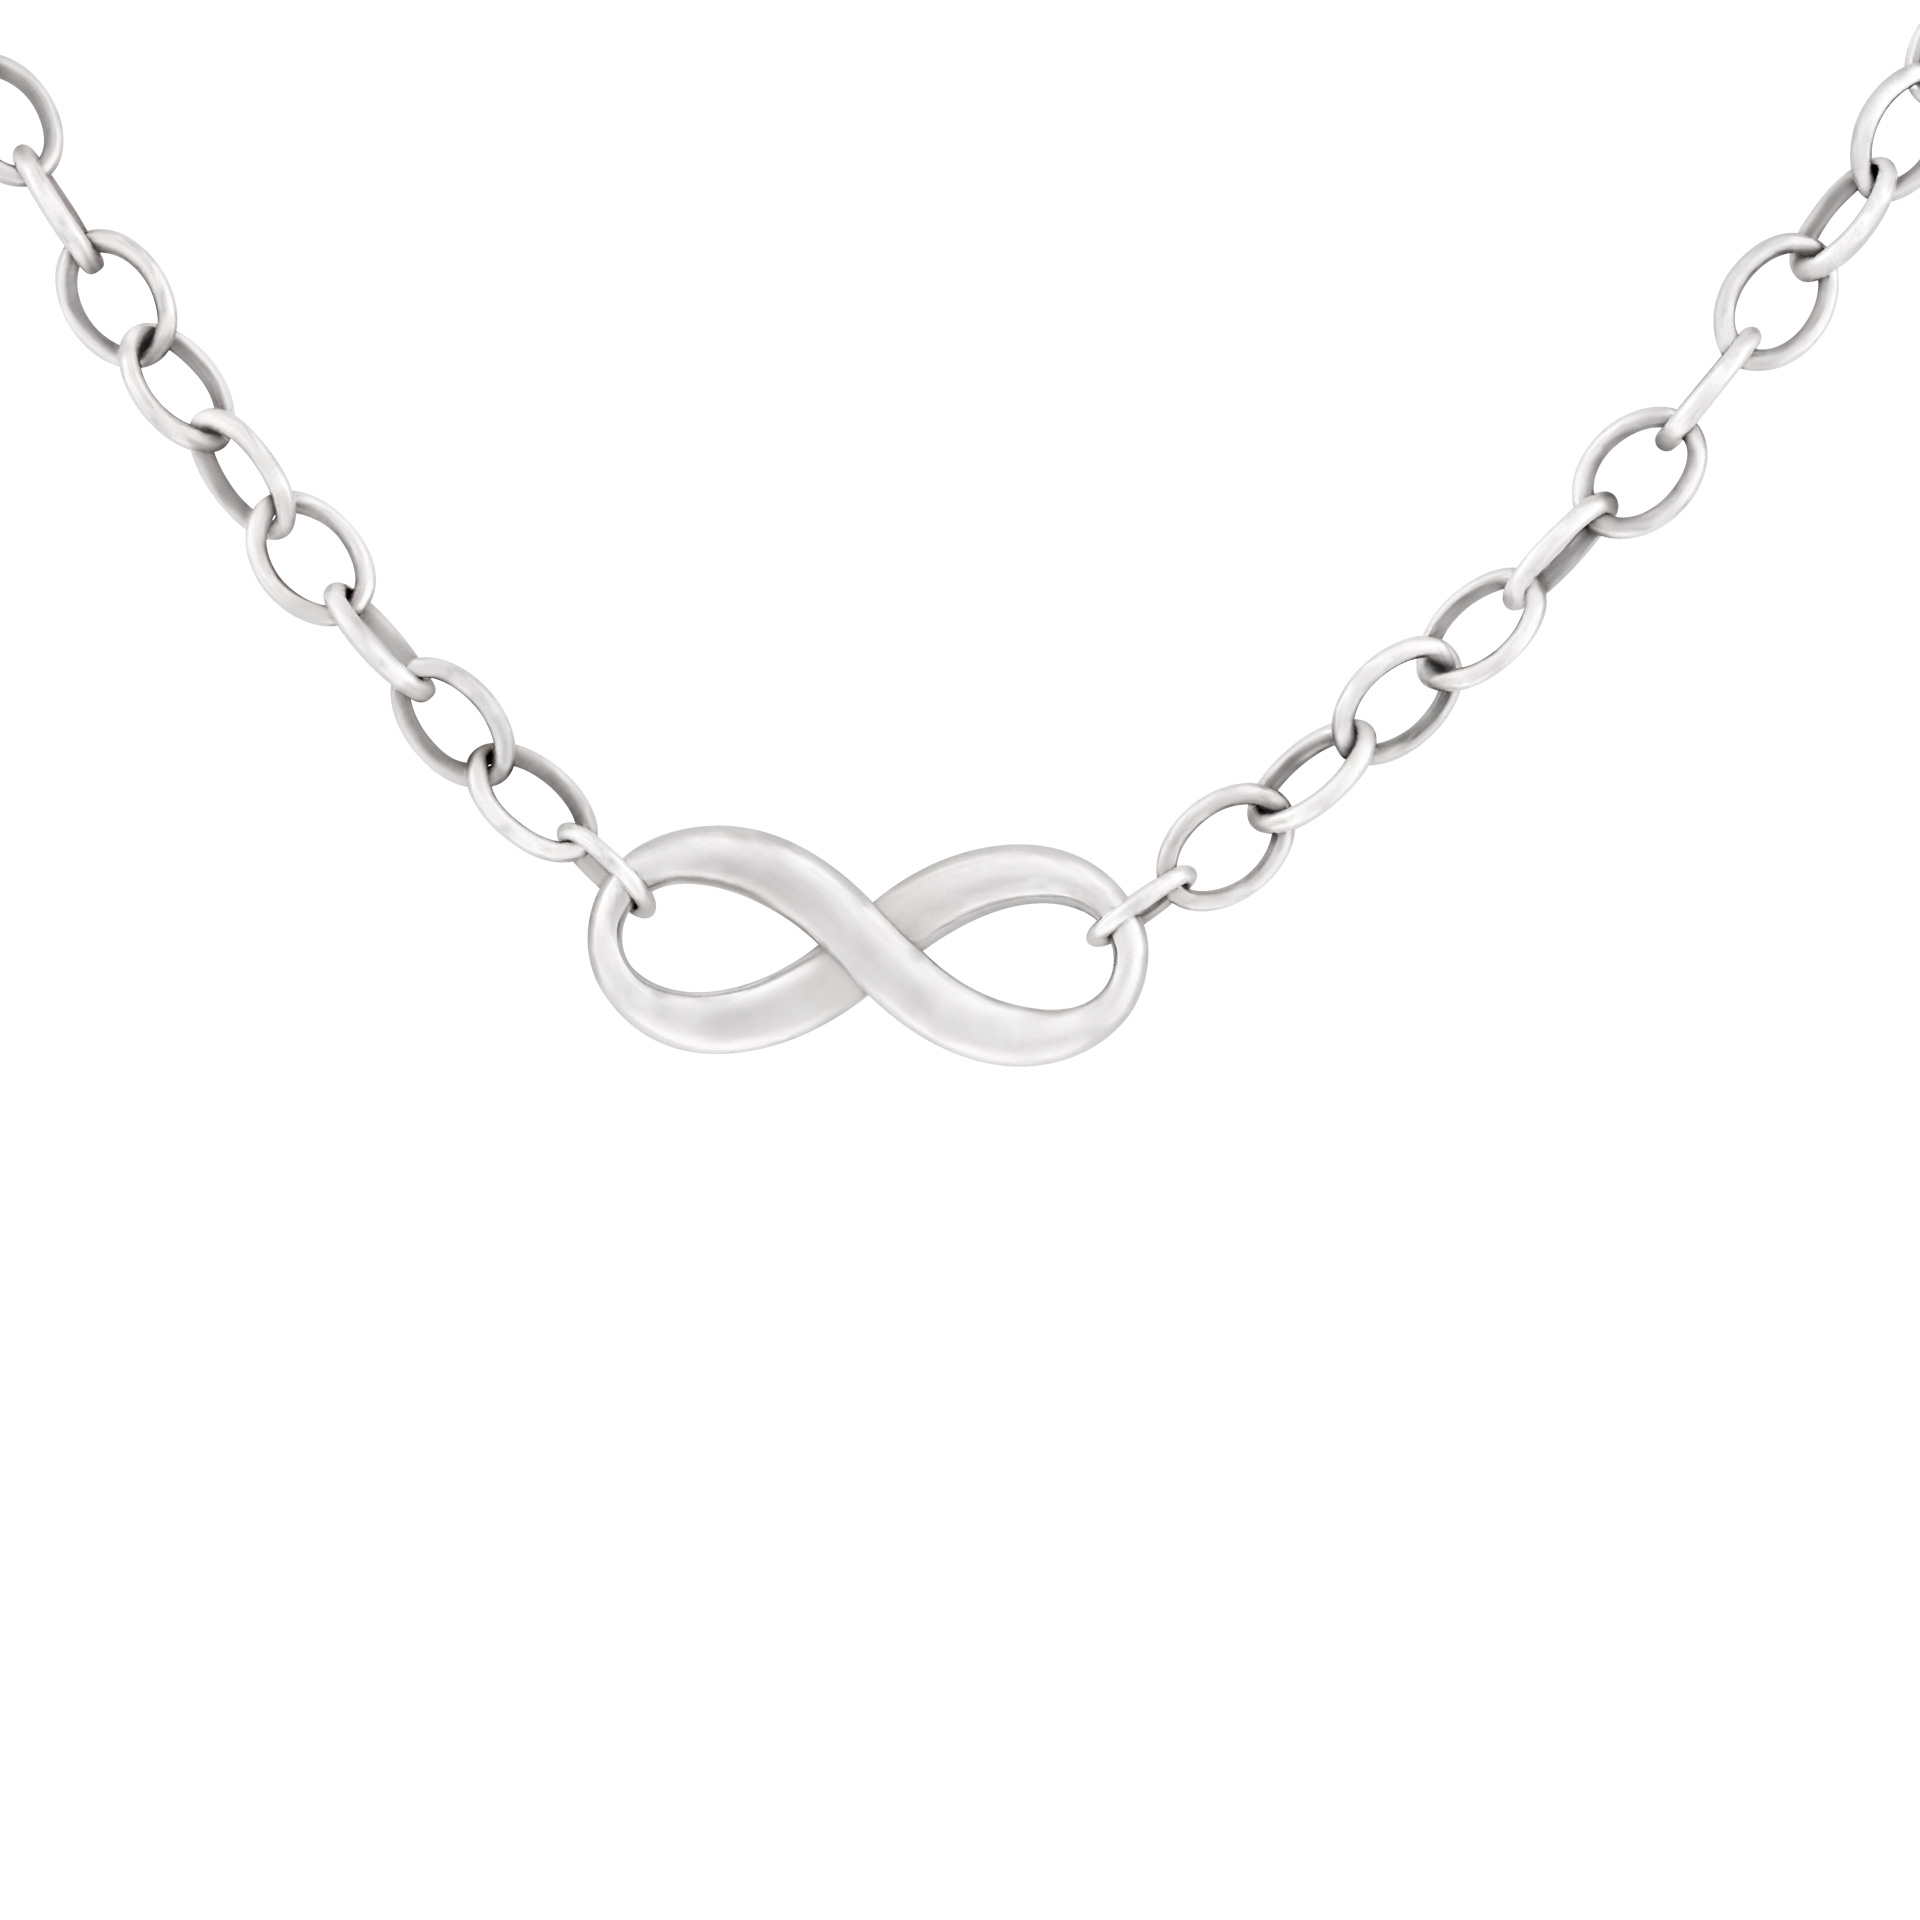 Tiffany & co Infinity pendant and chain in sterling silver.